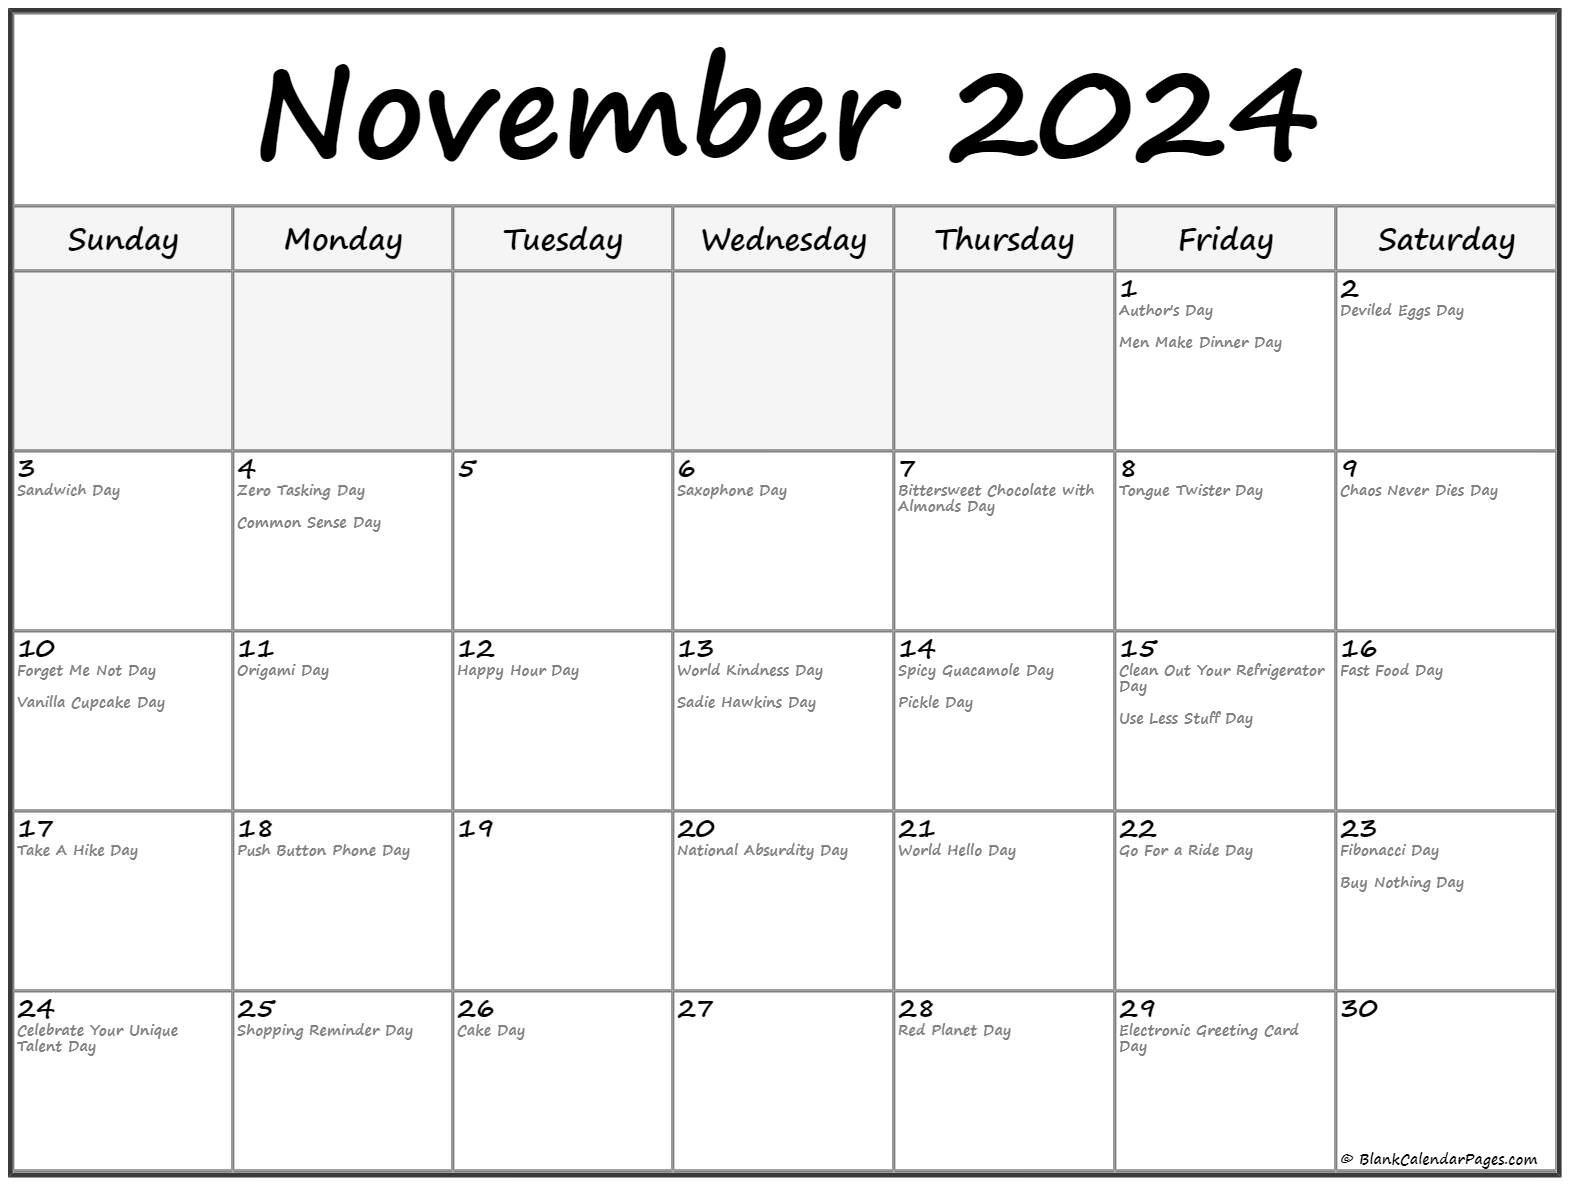 Collection of November 2021 calendars with holidays